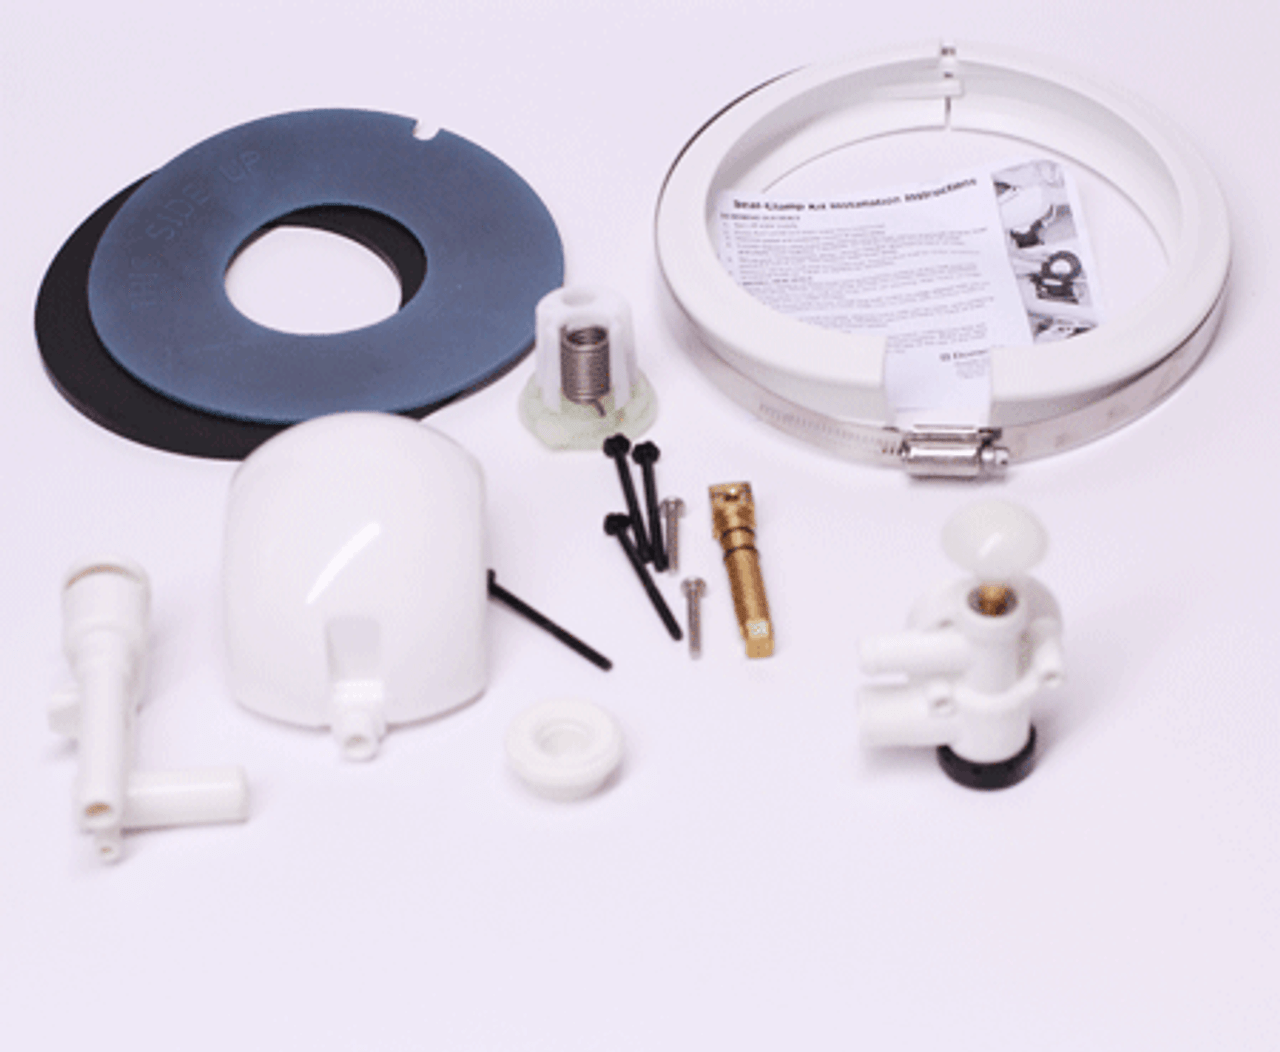 K-548+ REBUILD KIT.

This rebuild kit contains the repair parts required to refurbish a SeaLand Vacuflush 548+ Toilet.

This Kit Contains:
1.311462 Teflon and rubber Bowl seal
2.318162 Ball, Shaft and spring cartridge (236096)
3.310025 Ring and Clamp Assembly
4.316906 Vacuum Breaker
5.314349 Water Valve